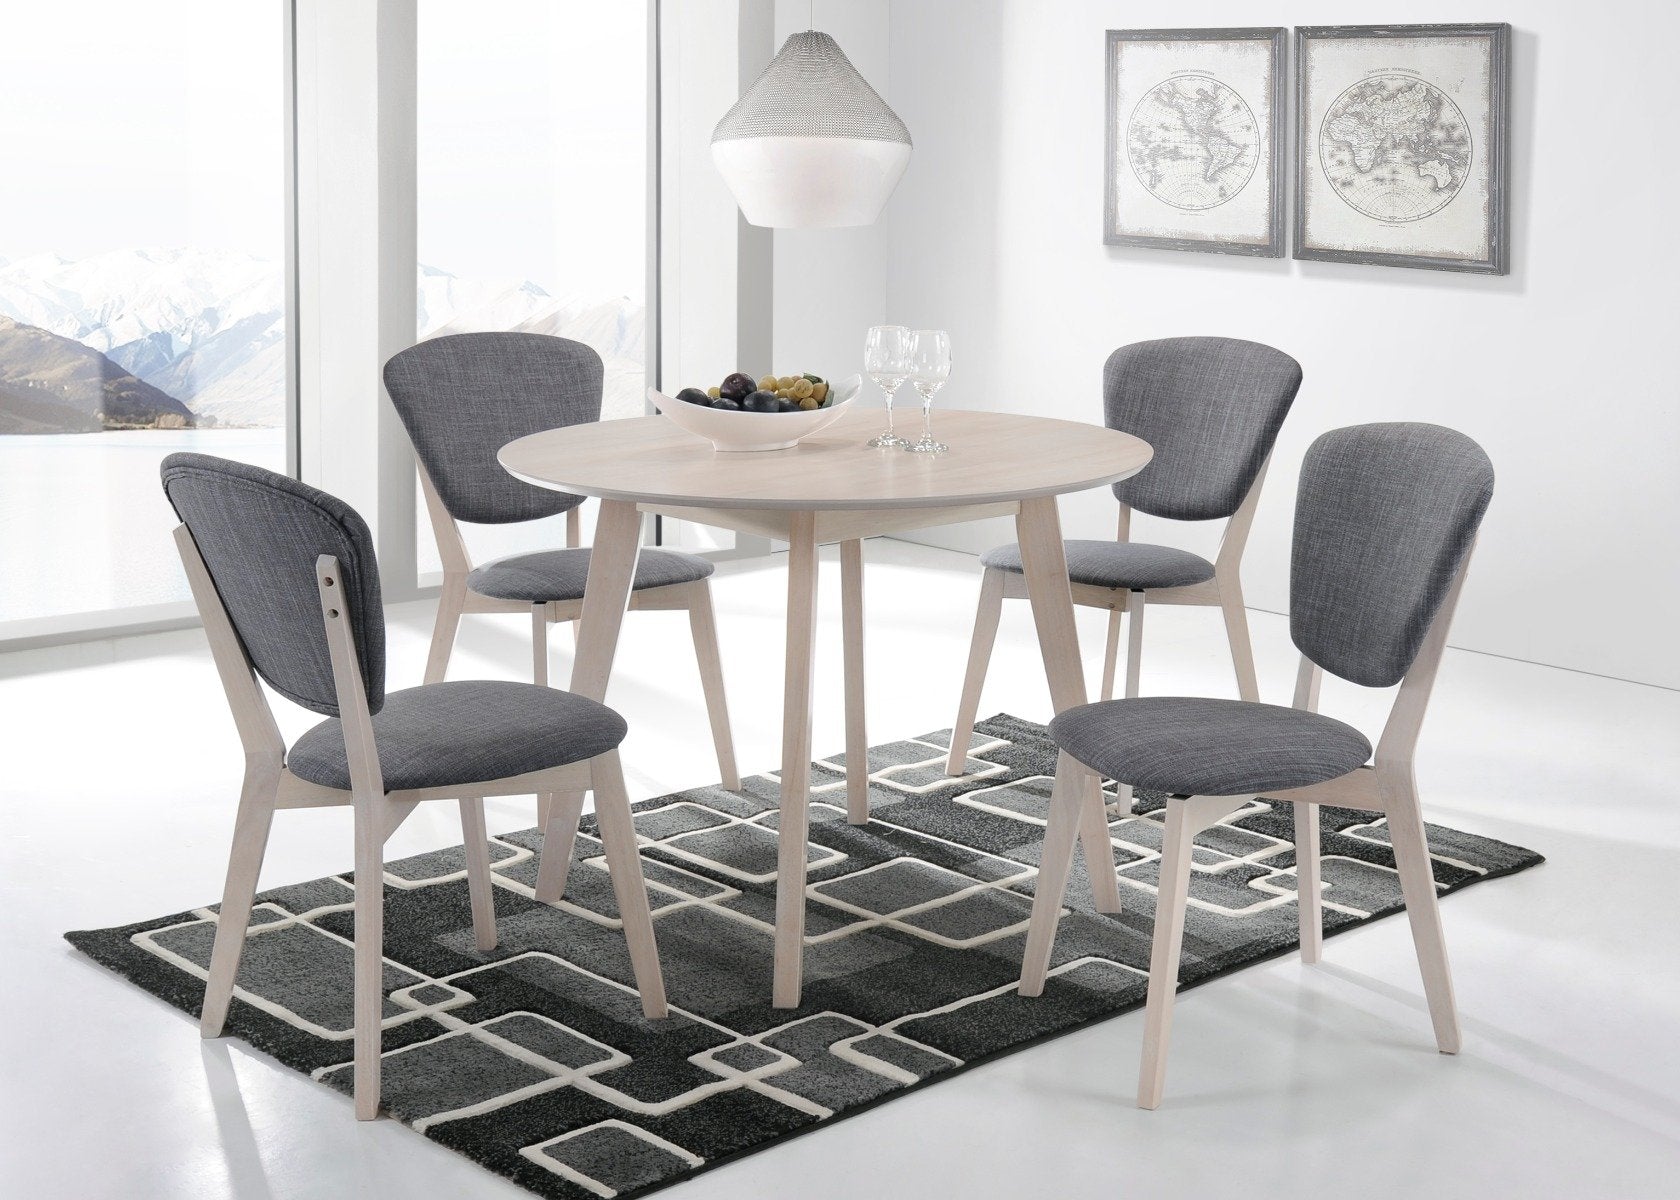 Dining Set of 2 Dining Chair Solid hardwood White Wash